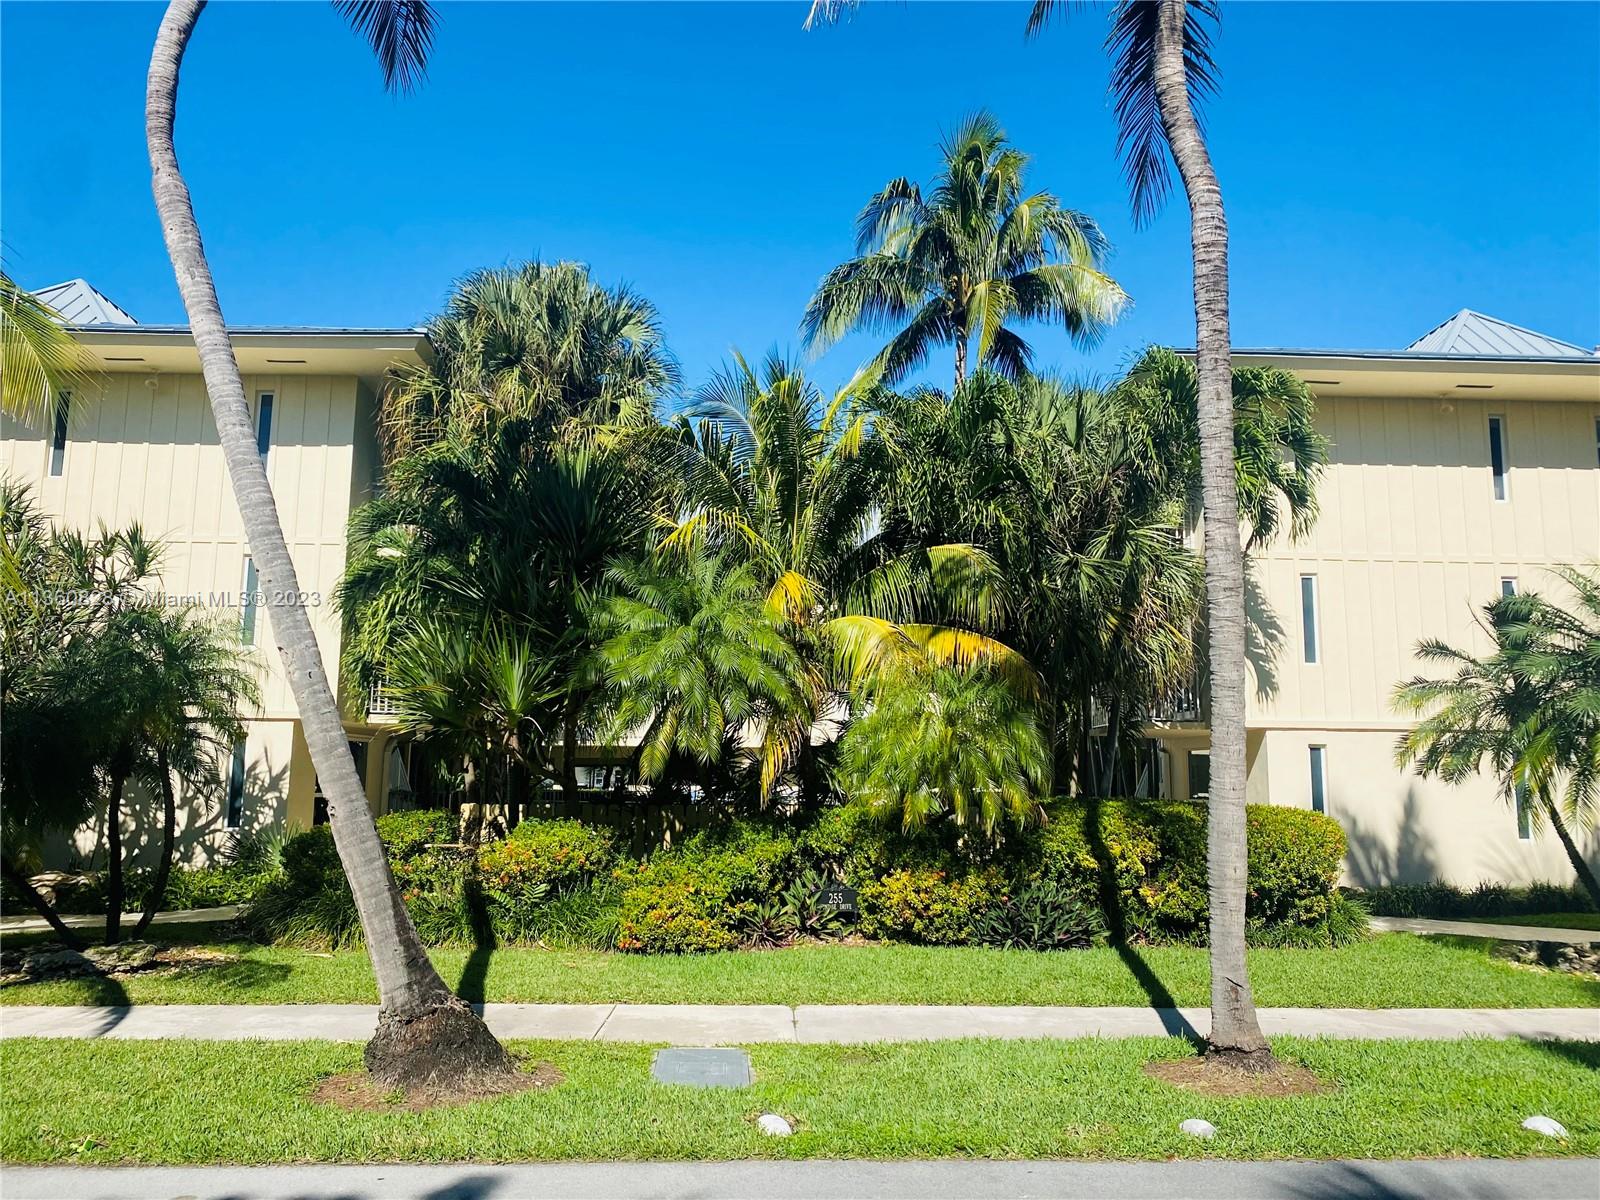 Boutique style condo close to the beach and shopping. Totally remodeled with stainless steel appliances and large ceramic tiles throughout. Easy access, assigned parking, Thermador dishwasher double door, oversized stainless steal refrigerator.